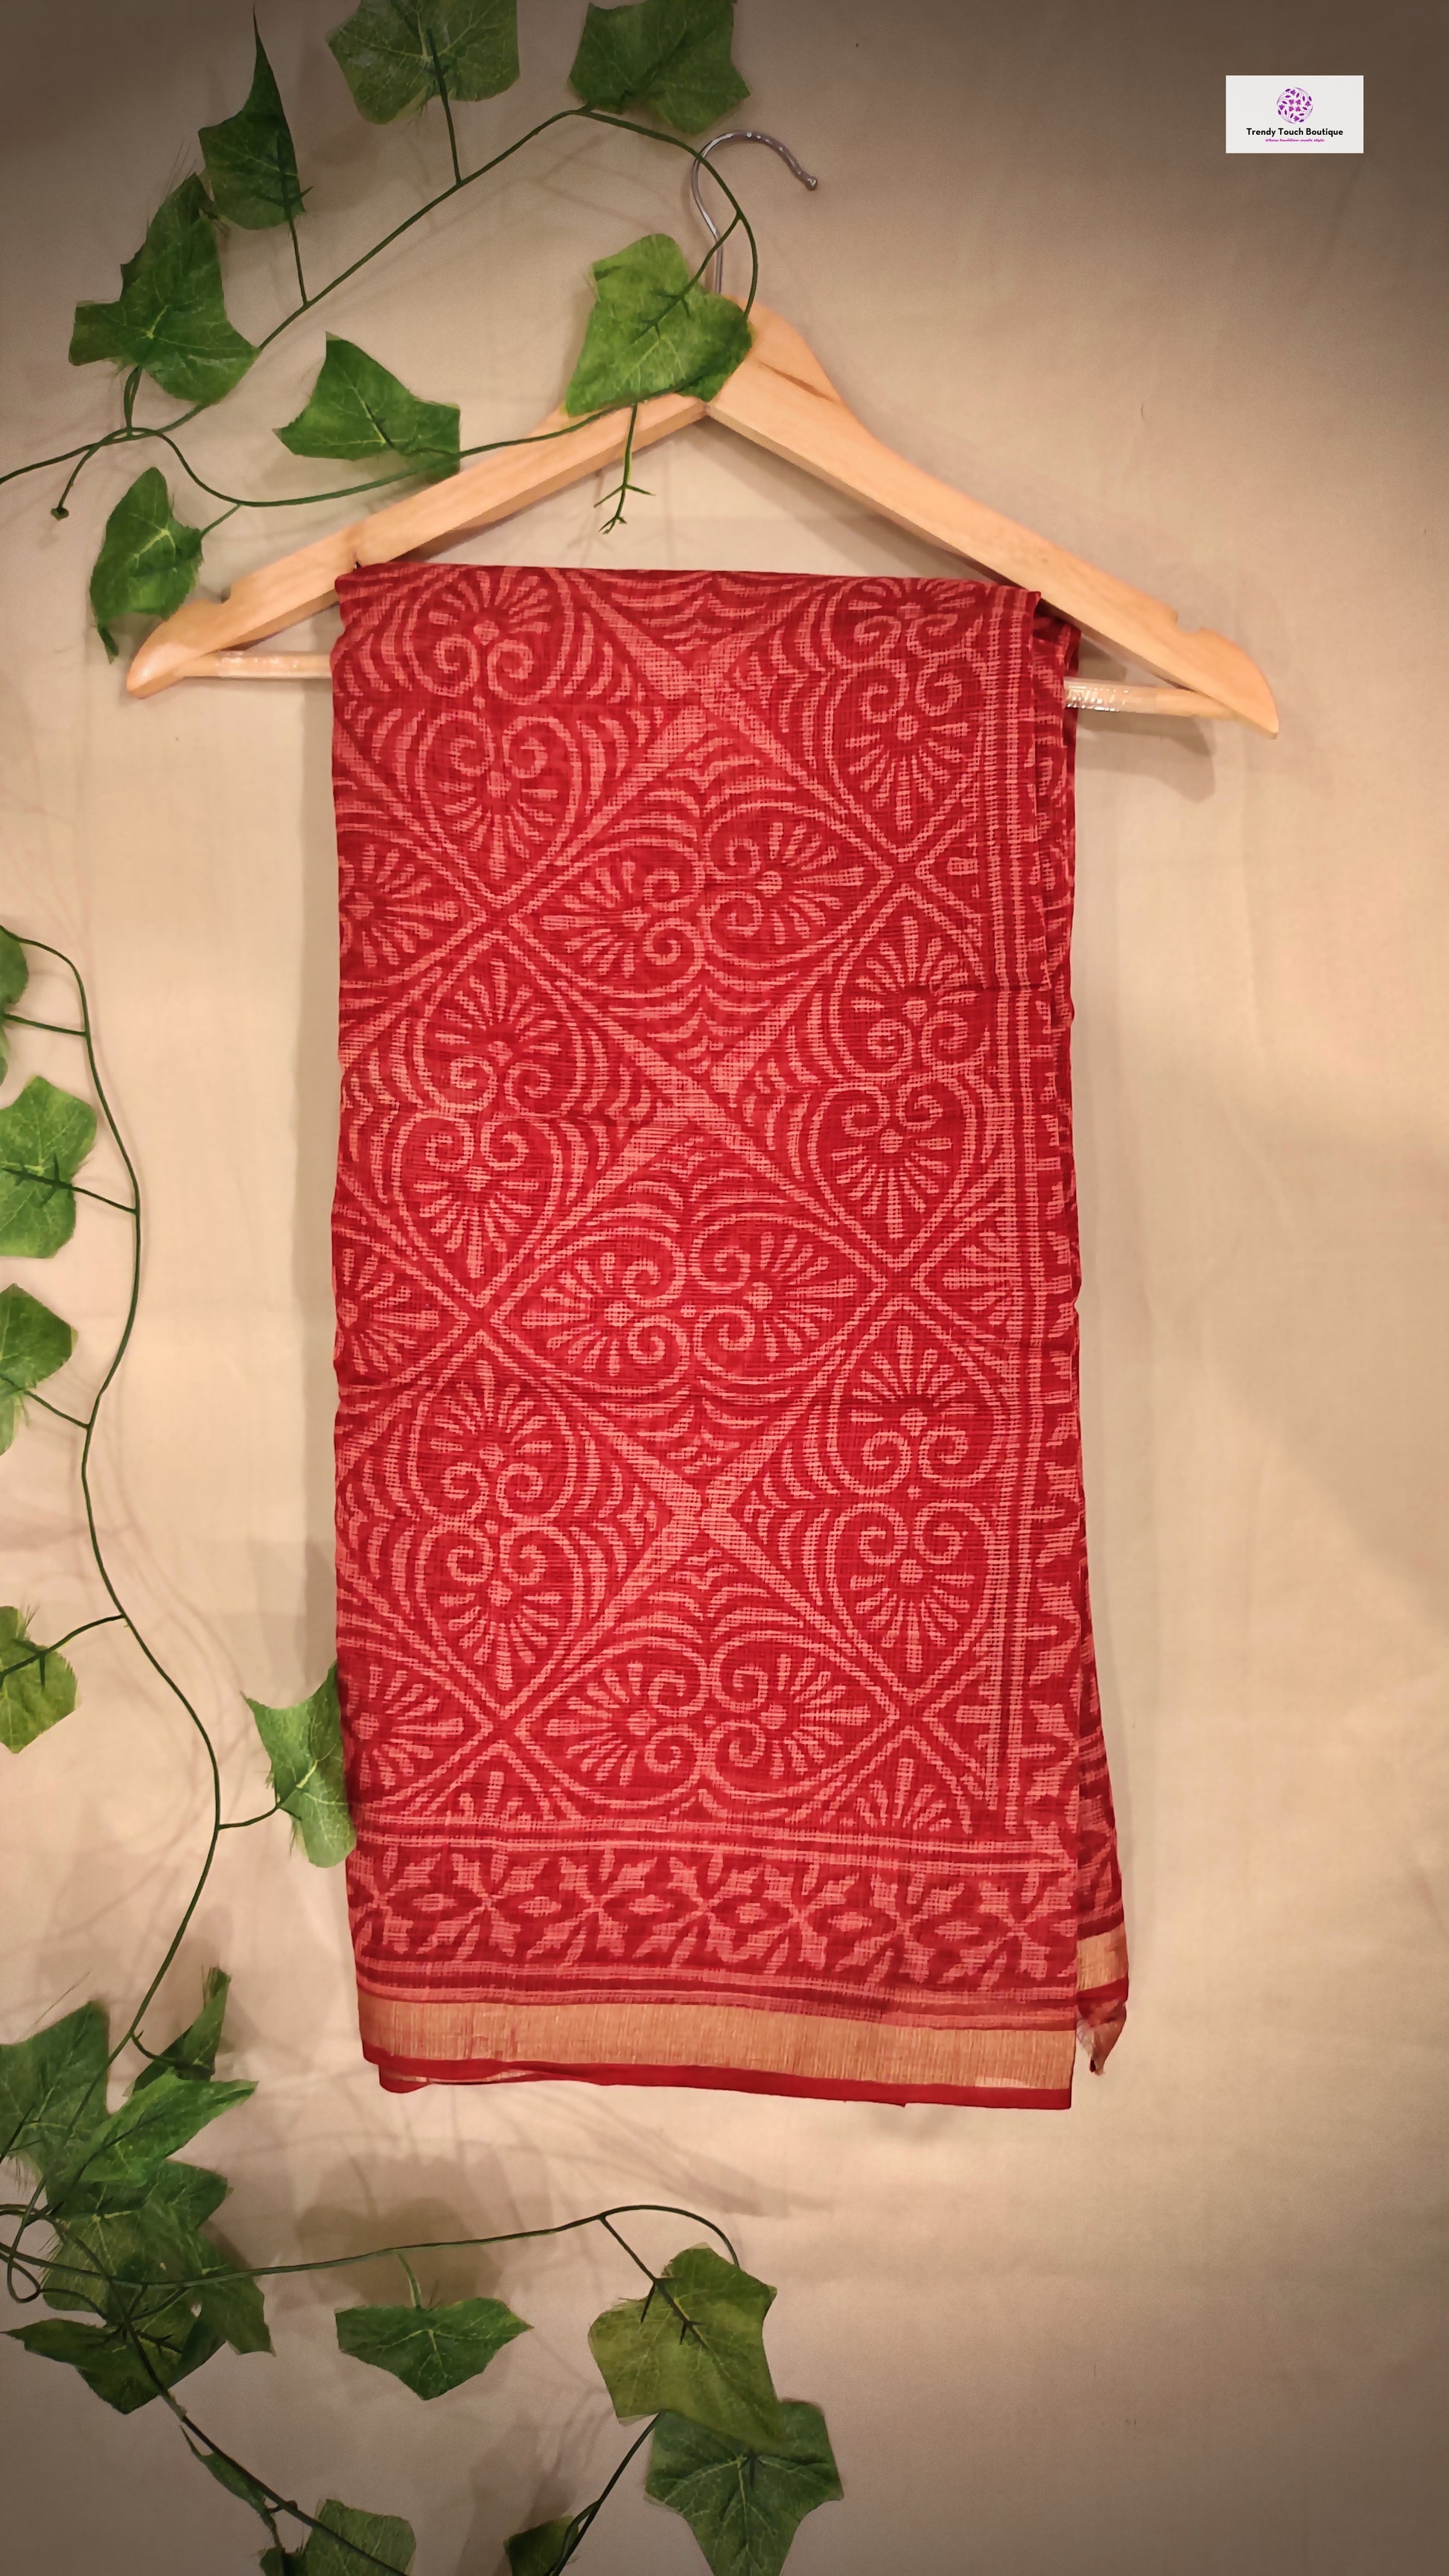 Organic Kota Doria Saree Handblock print in natural dye red soft best summer saree for office and casual outing best price with blouse piece